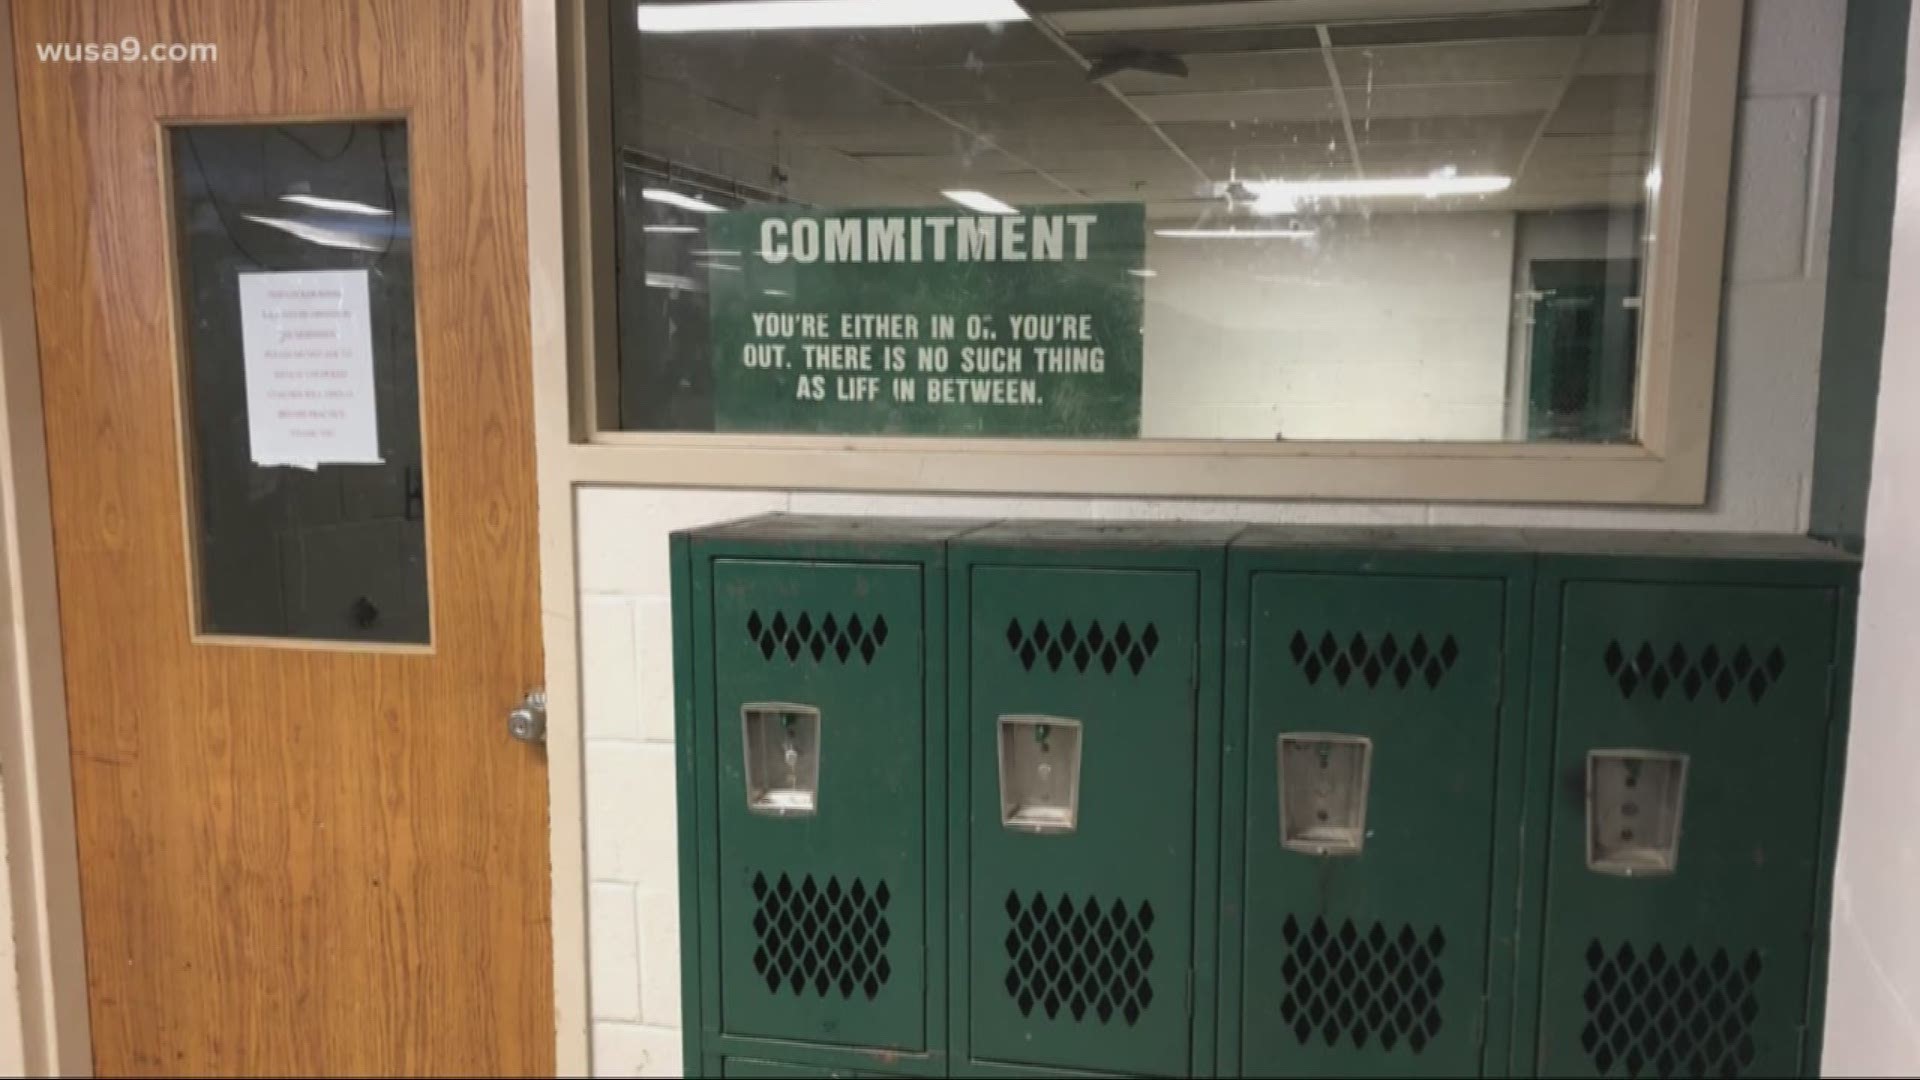 The Montgomery County Public Schools investigation into alleged rapes in a Damascus High School locker room concluded, school officials announced Tuesday.